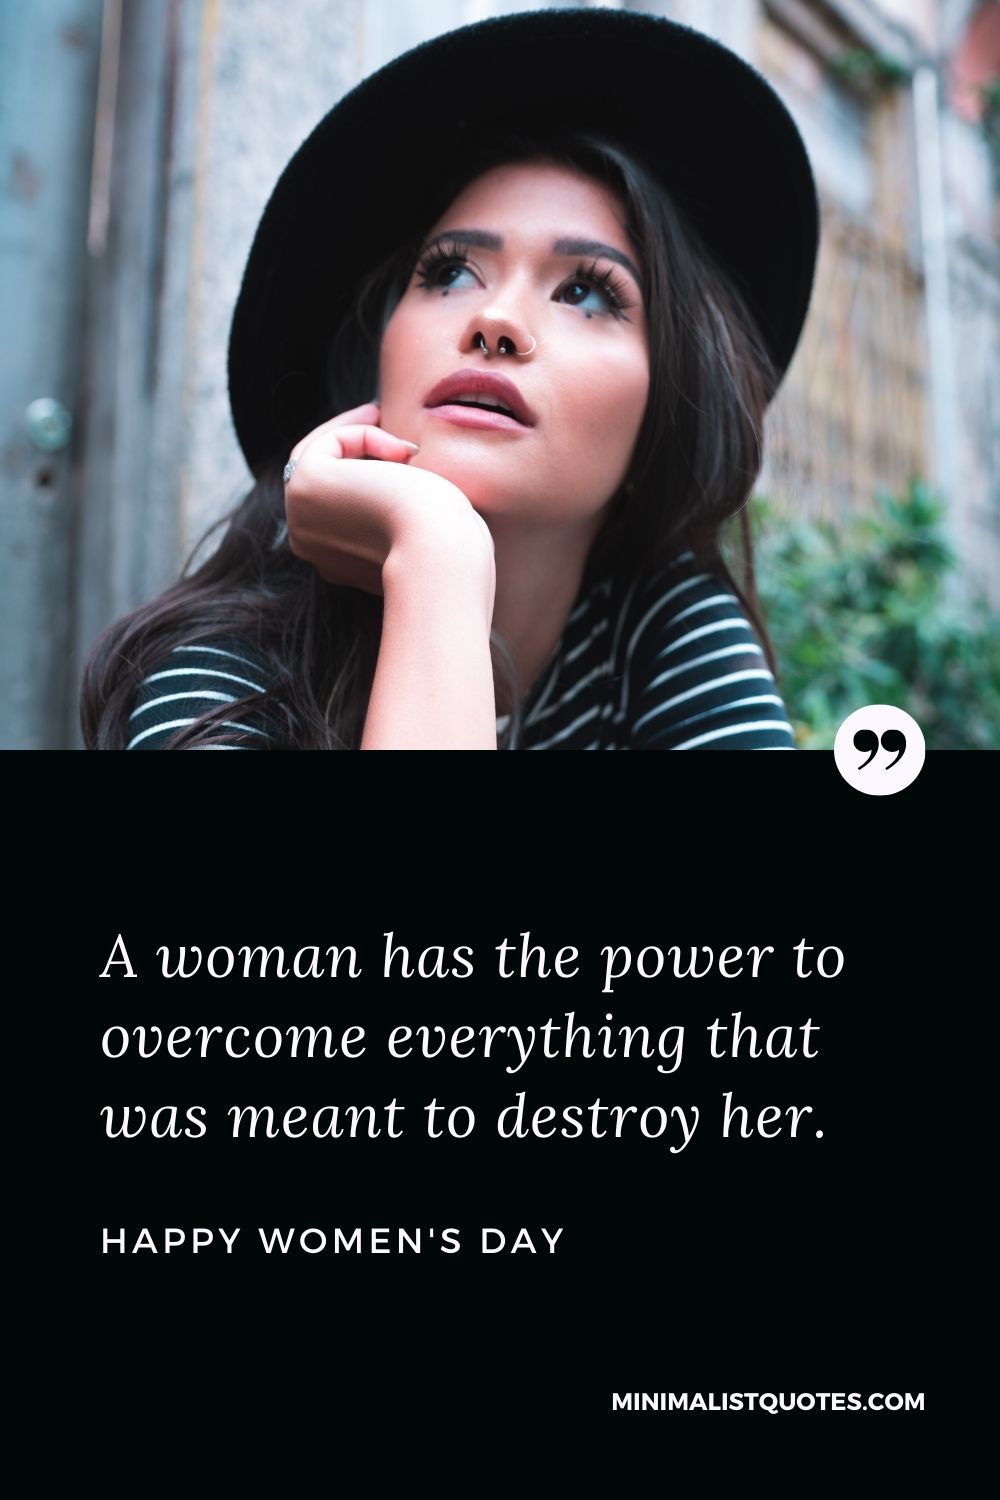 Women's Day Wish & Message Image: A woman has the power to overcome everything that was meant to destroy her.